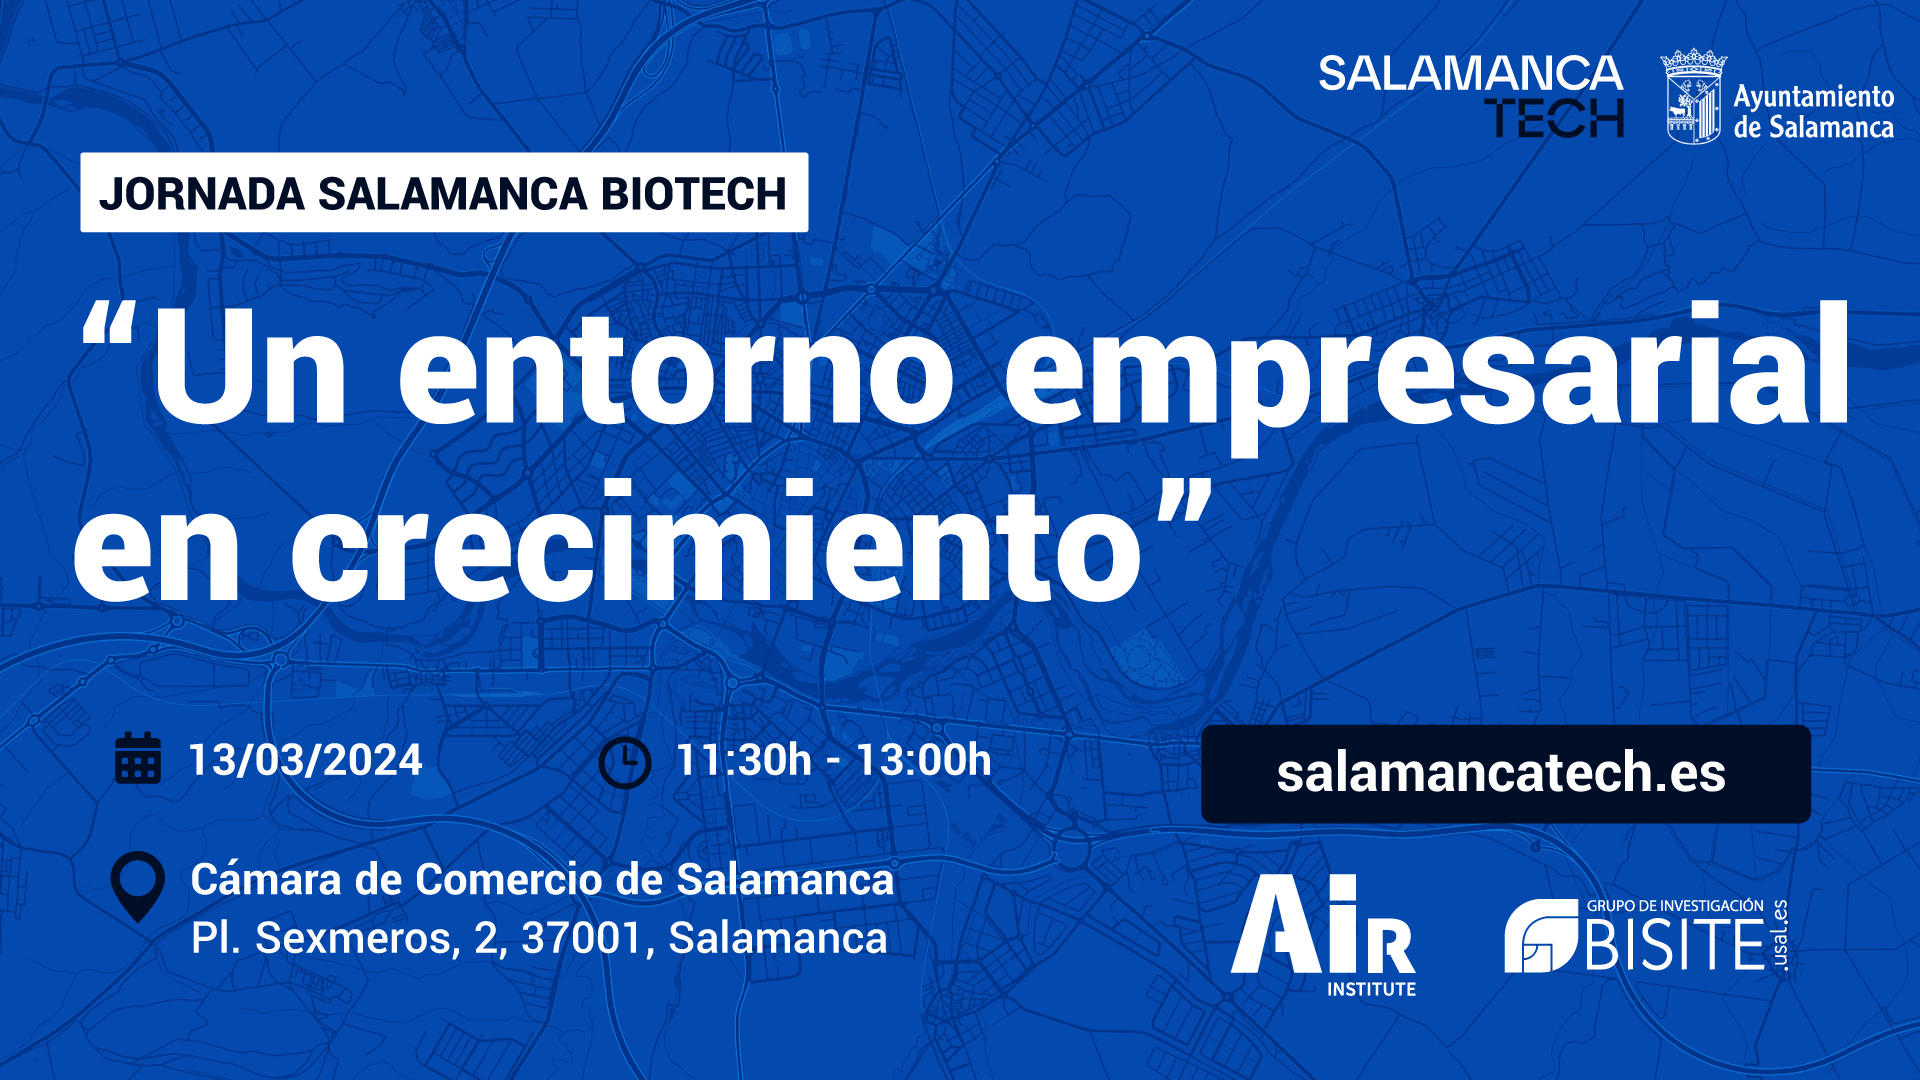 Companies, new technologies and the biotechnology sector at the next Salamanca Tech conference